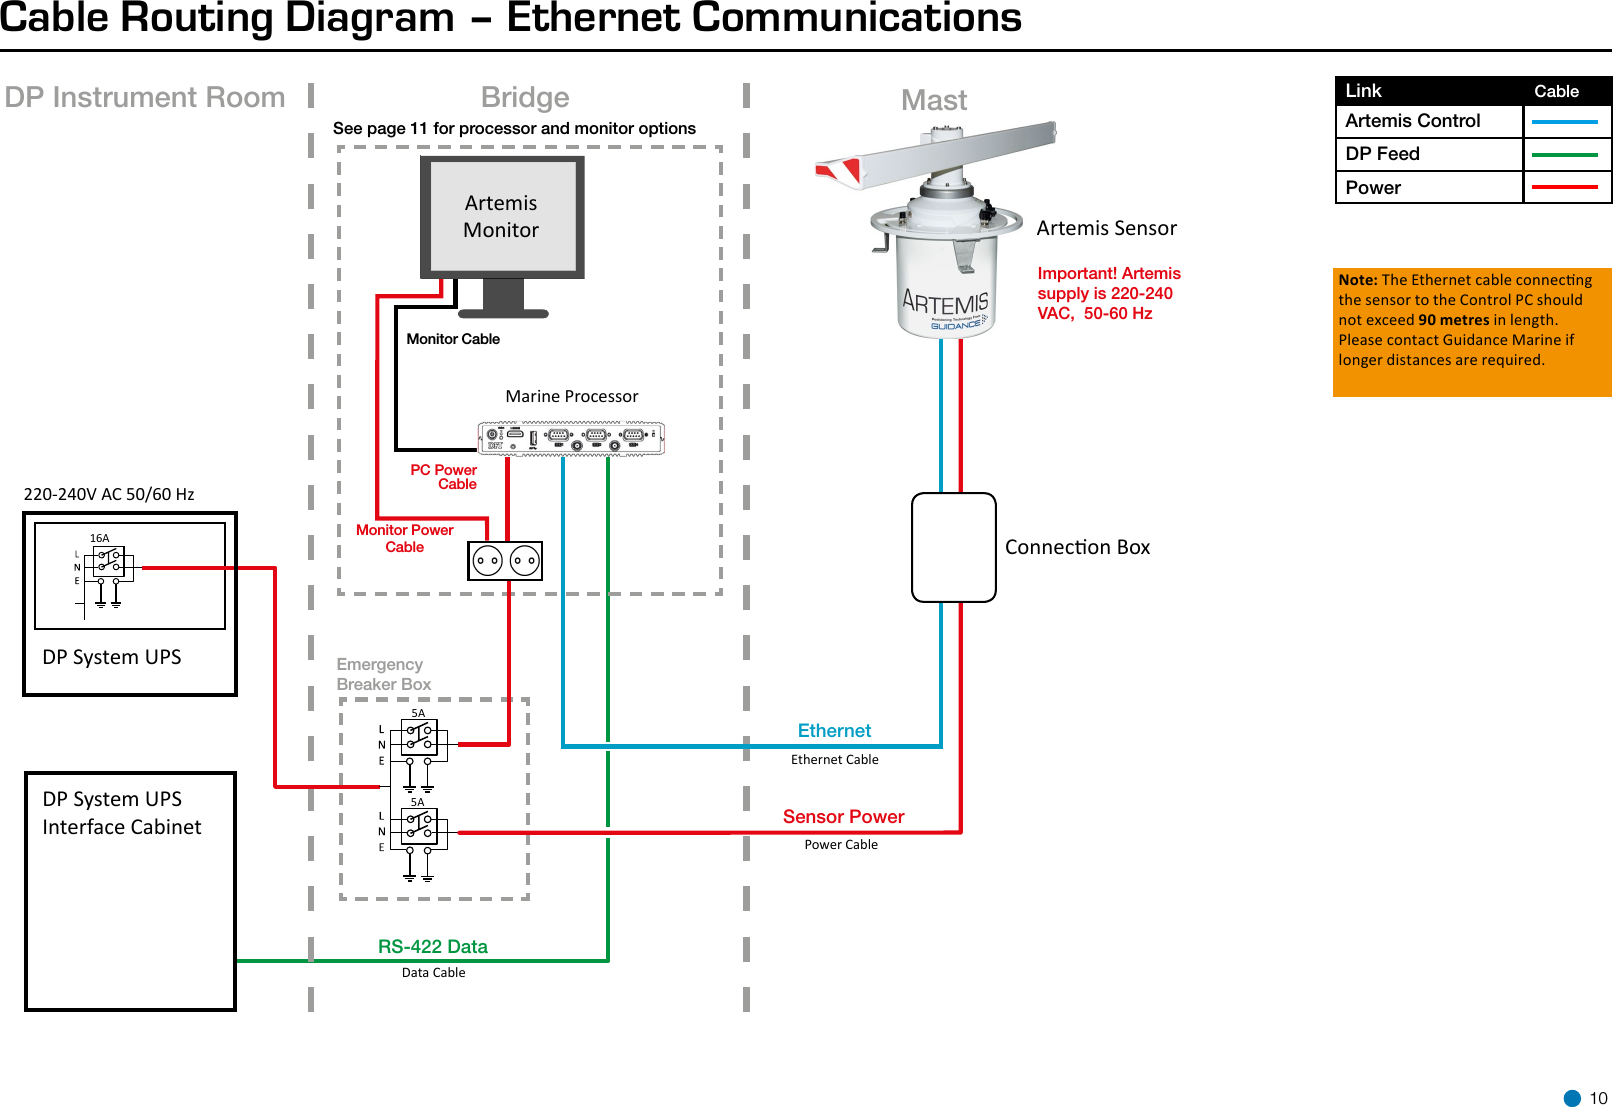 Cable Routing Diagram – Ethernet CommunicationsEthernetSensor PowerRS-422 Data16A5ADP System UPSDP System UPS Interface CabinetArtemis MonitorMonitor CableDP Instrument Room Bridge MastEmergency Breaker BoxSee page 11 for processor and monitor options5AConnecon BoxPC PowerCableMonitor Power CableMarine ProcessorData CableEthernet CablePower Cable220-240V AC 50/60 HzNote: The Ethernet cable connecng the sensor to the Control PC should not exceed 90 metres in length. Please contact Guidance Marine if longer distances are required.Link                                 CableArtemis ControlDP FeedPowerArtemis SensorImportant! Artemis supply is 220-240 VAC,  50-60 Hz 10